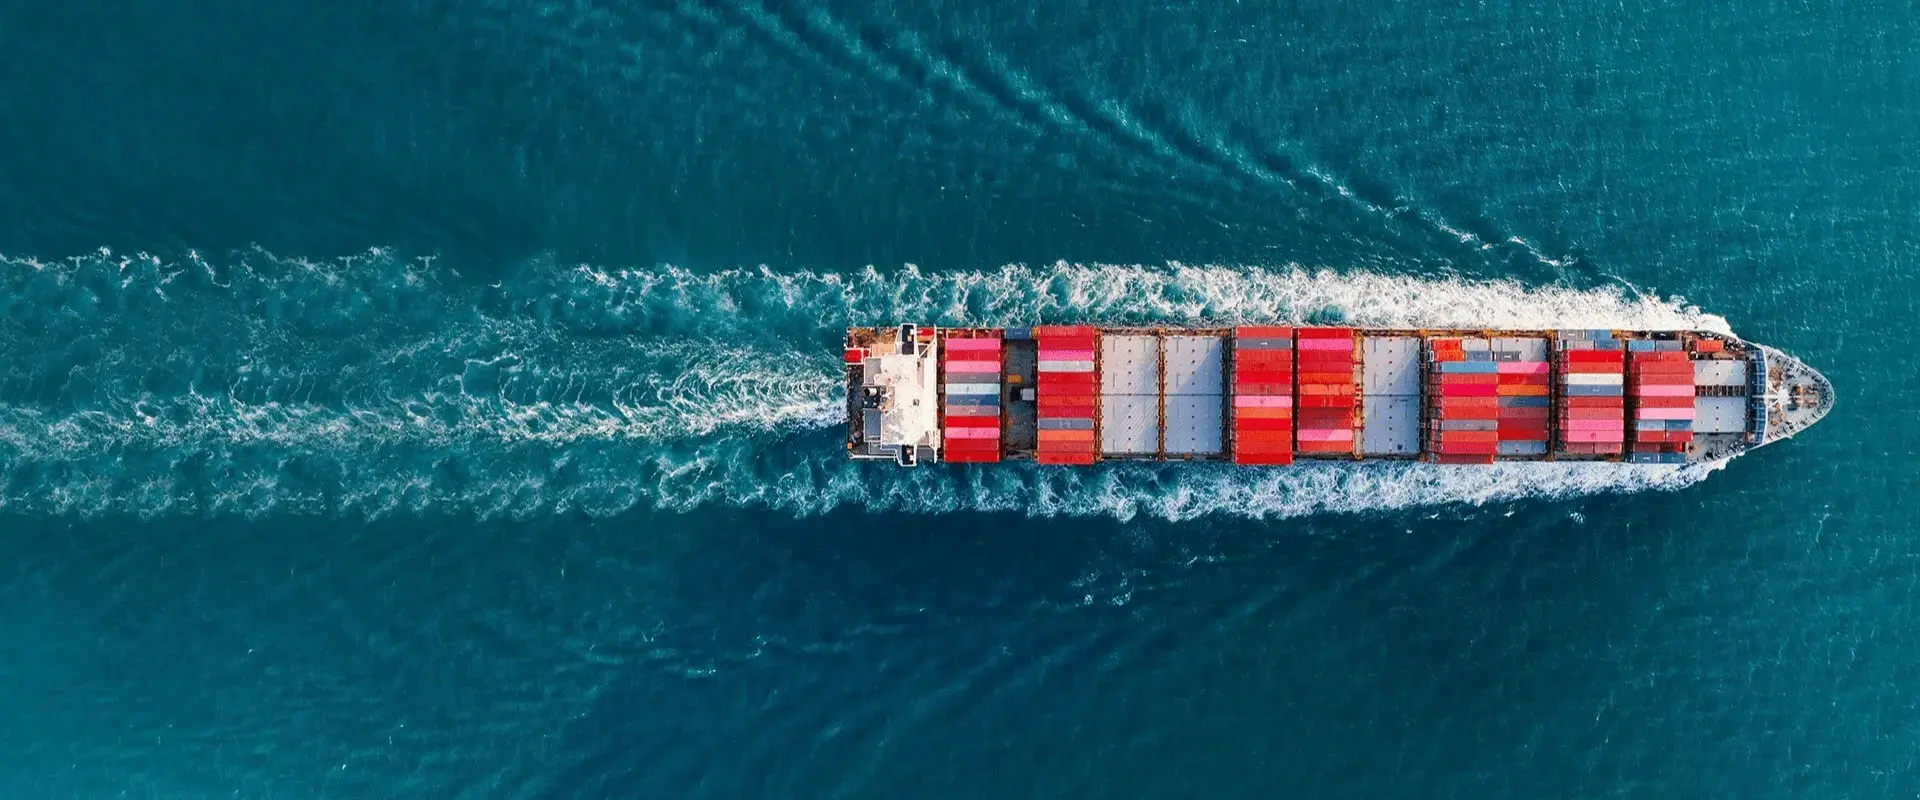 Top view of cargo container ship carrying container